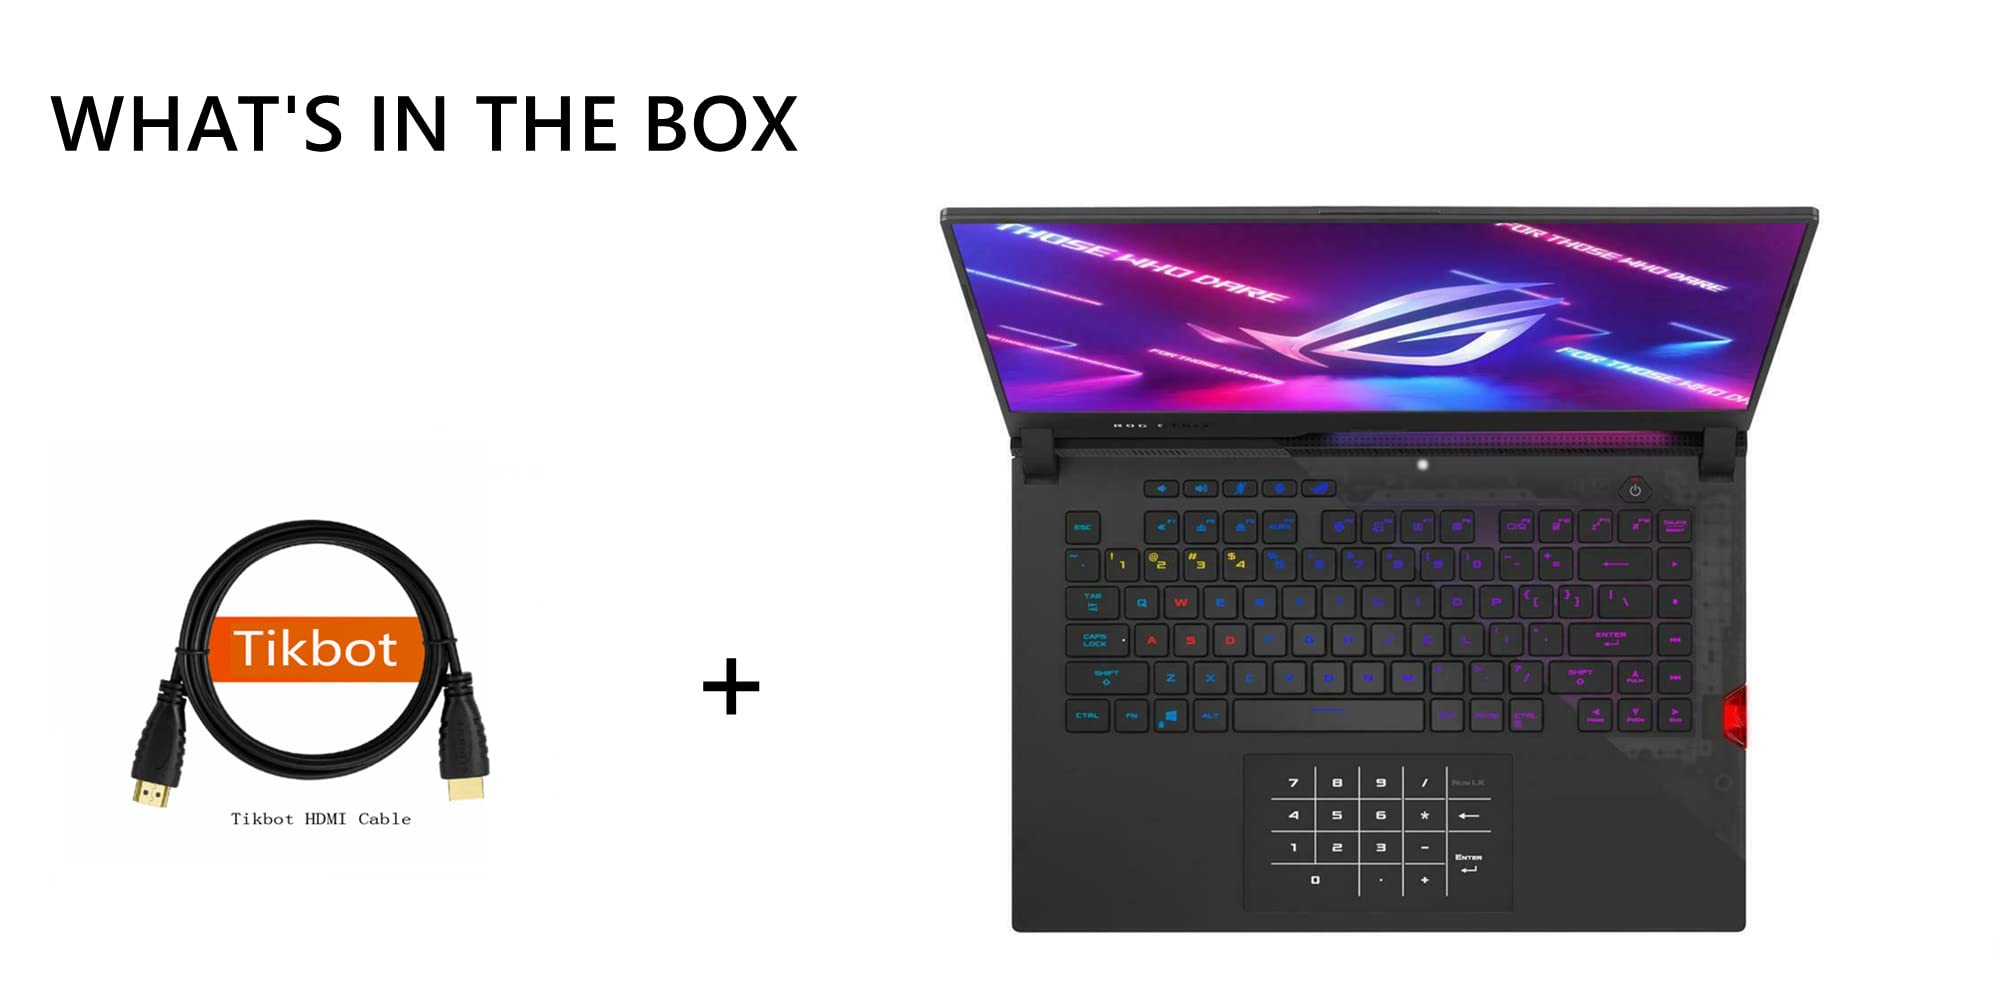 ASUS ROG Strix Scar 15 (2021) Gaming Laptop, 15.6" 300Hz IPS Type FHD Display, NVIDIA GeForce RTX 3080 (130W), 8-core AMD Ryzen 9 5900HX，Windows 10 Home, with HDMI Cable (32GB RAM | 2TB PCIe SSD)